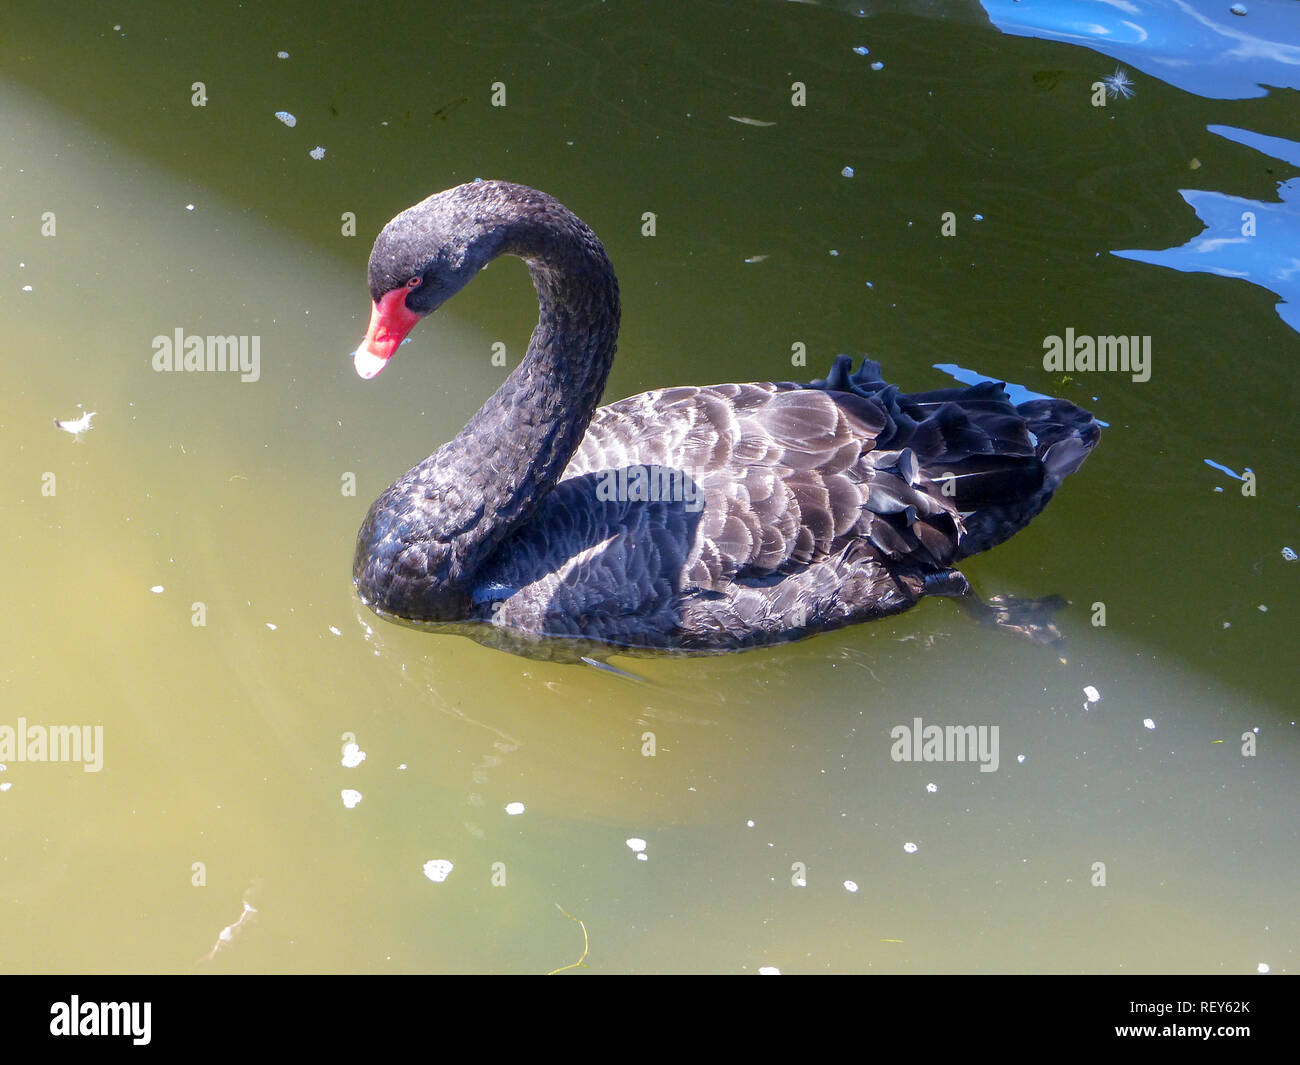 Black swan (Cygnus atratus). This waterbird is native to Australia but has been introduced throughout the world. Black swans feed on water plants. The Stock Photo